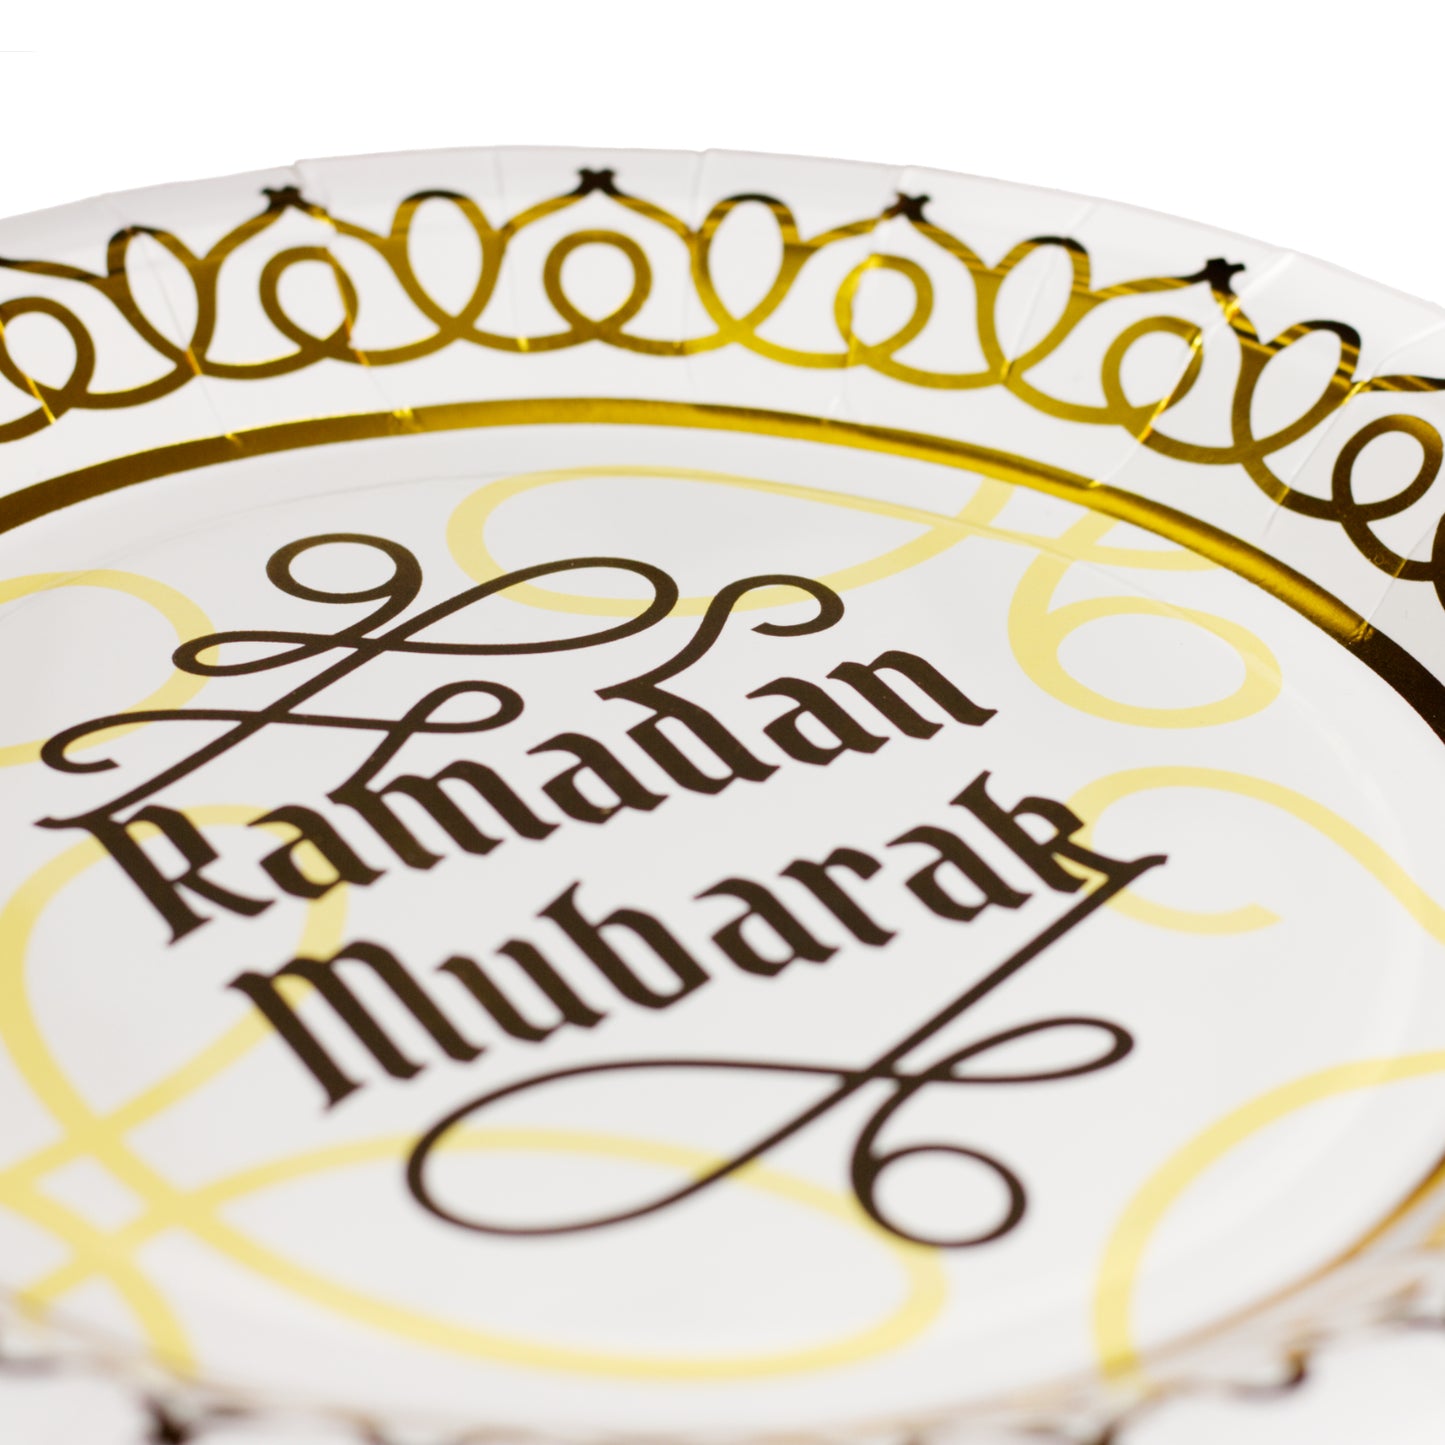 Ramadan Classic White & Gold Plate and Cup Set - 10pk